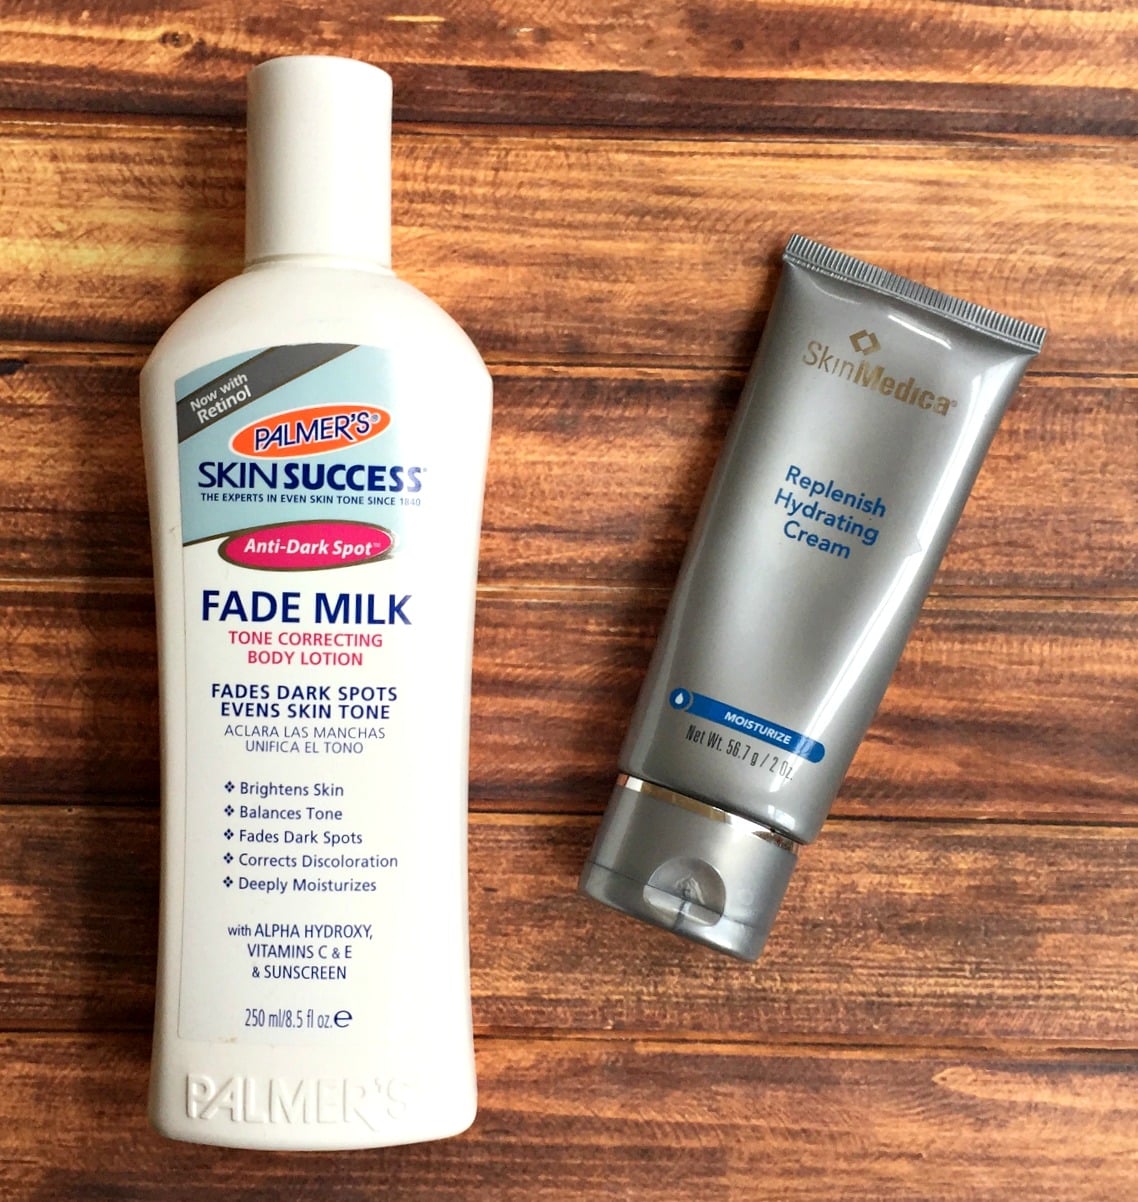 A few of my favorite things from Amazon - Palmer's Fade Milk and SkinMedica Replenish Hydrating cream